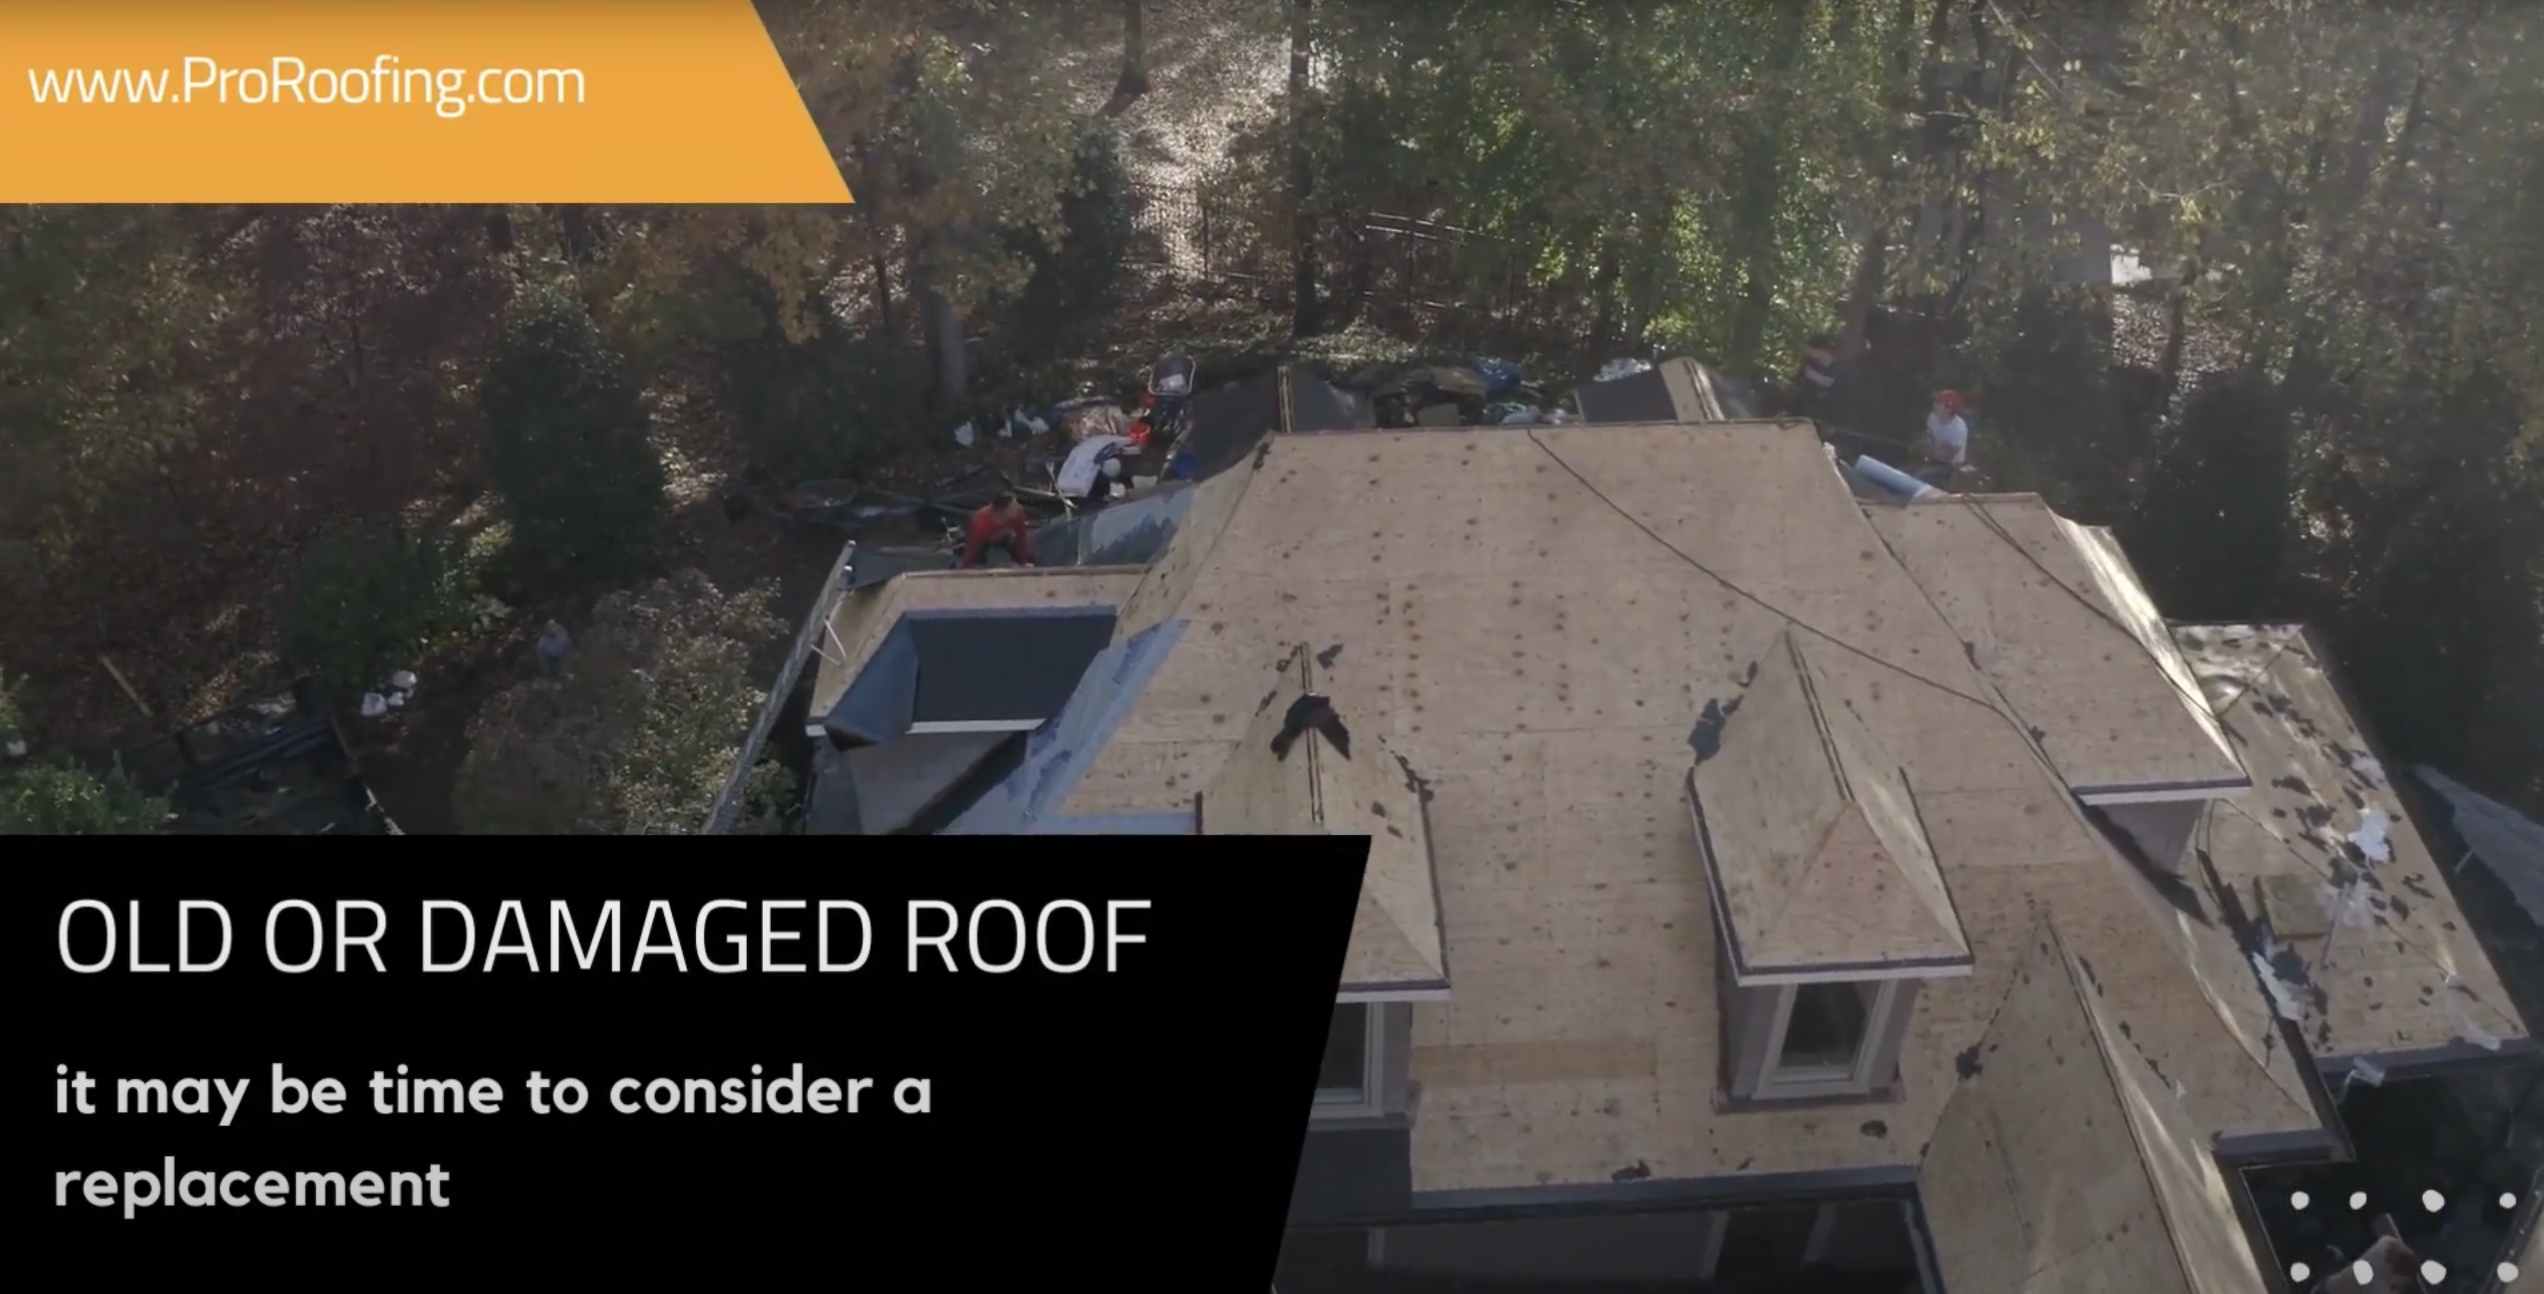 Time For A Roof Replacement?